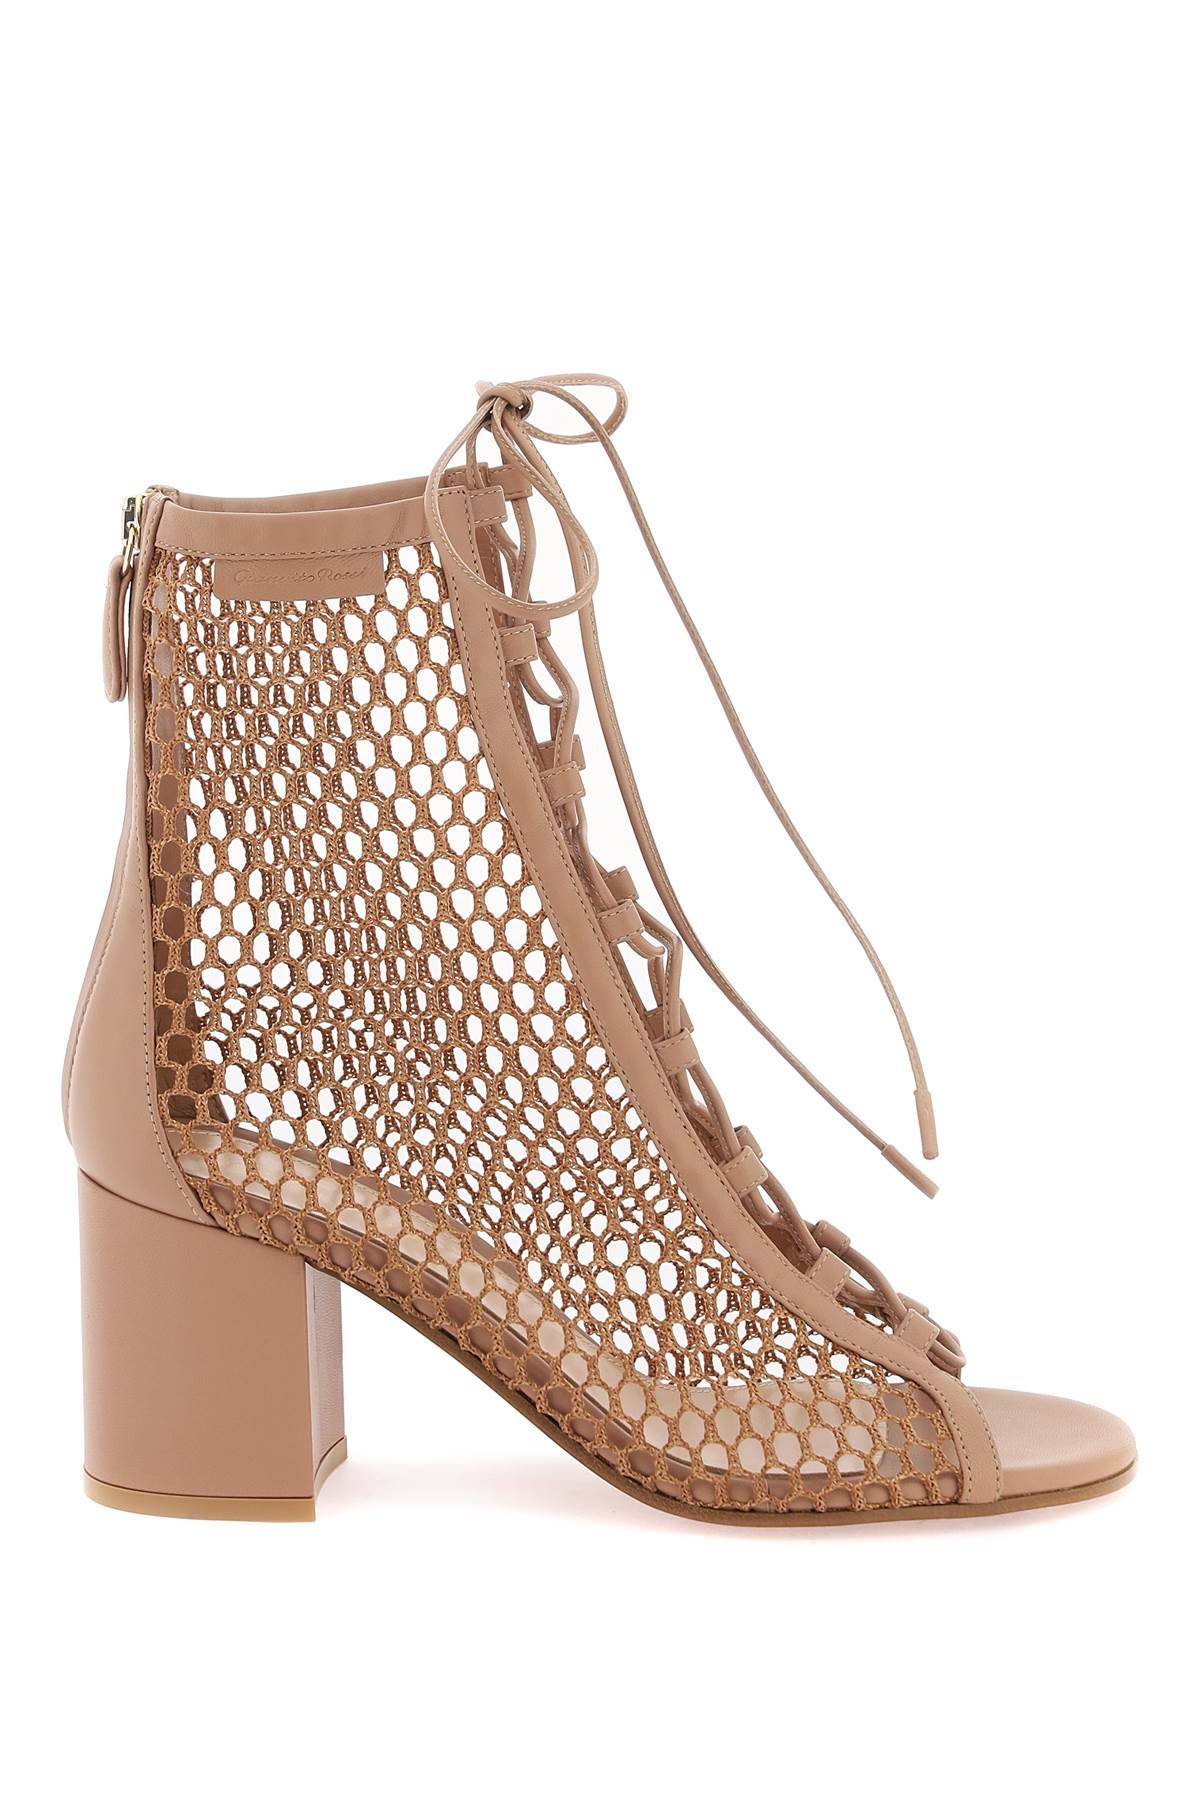 Gianvito Rossi GIANVITO ROSSI open-toe mesh ankle boots with